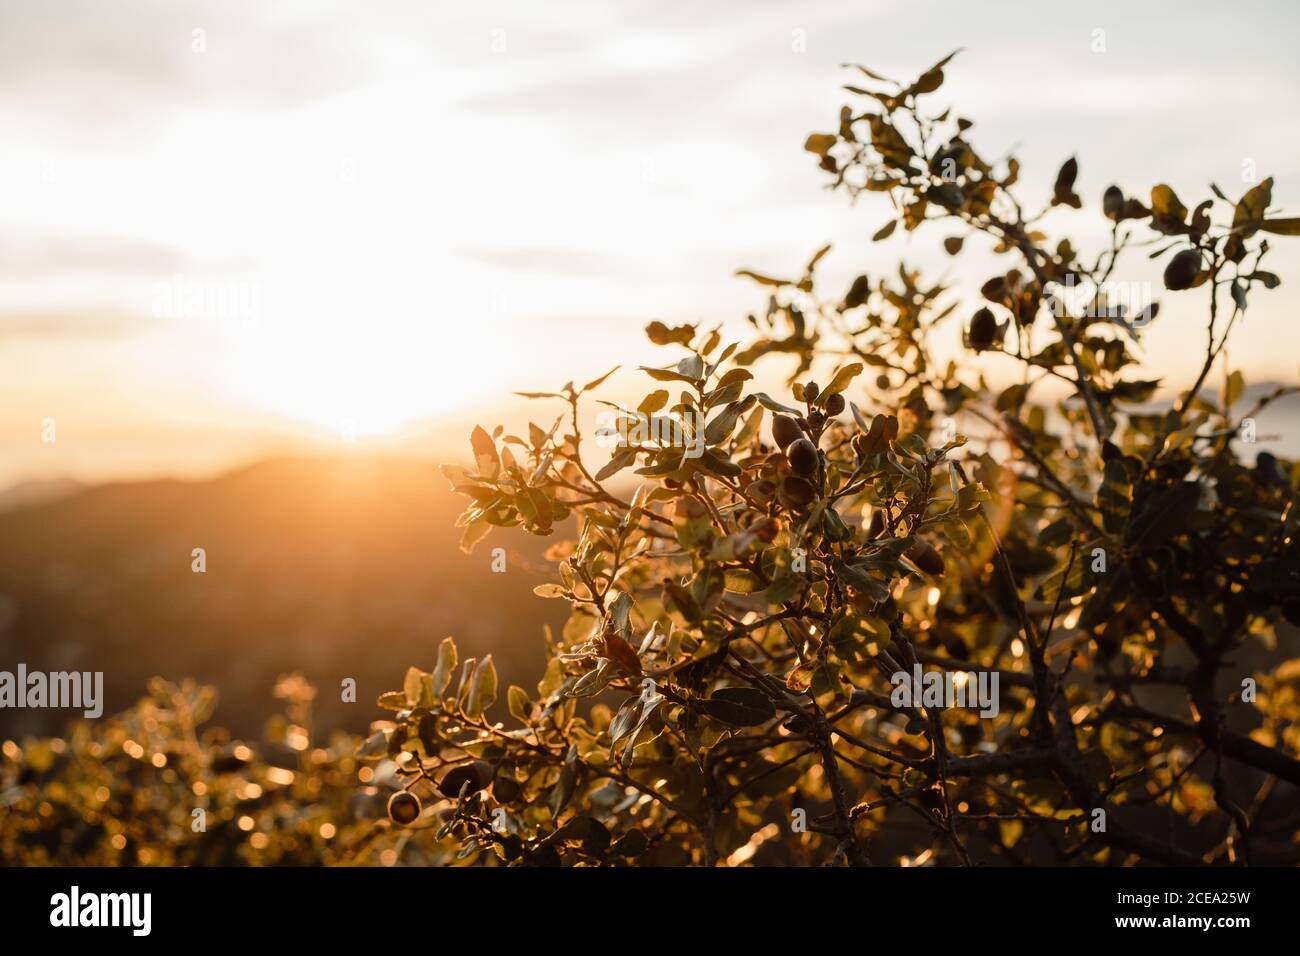 Twigs and leaves of small shrub on blurred background of wonderful sundown sky in amazing countryside Stock Photo